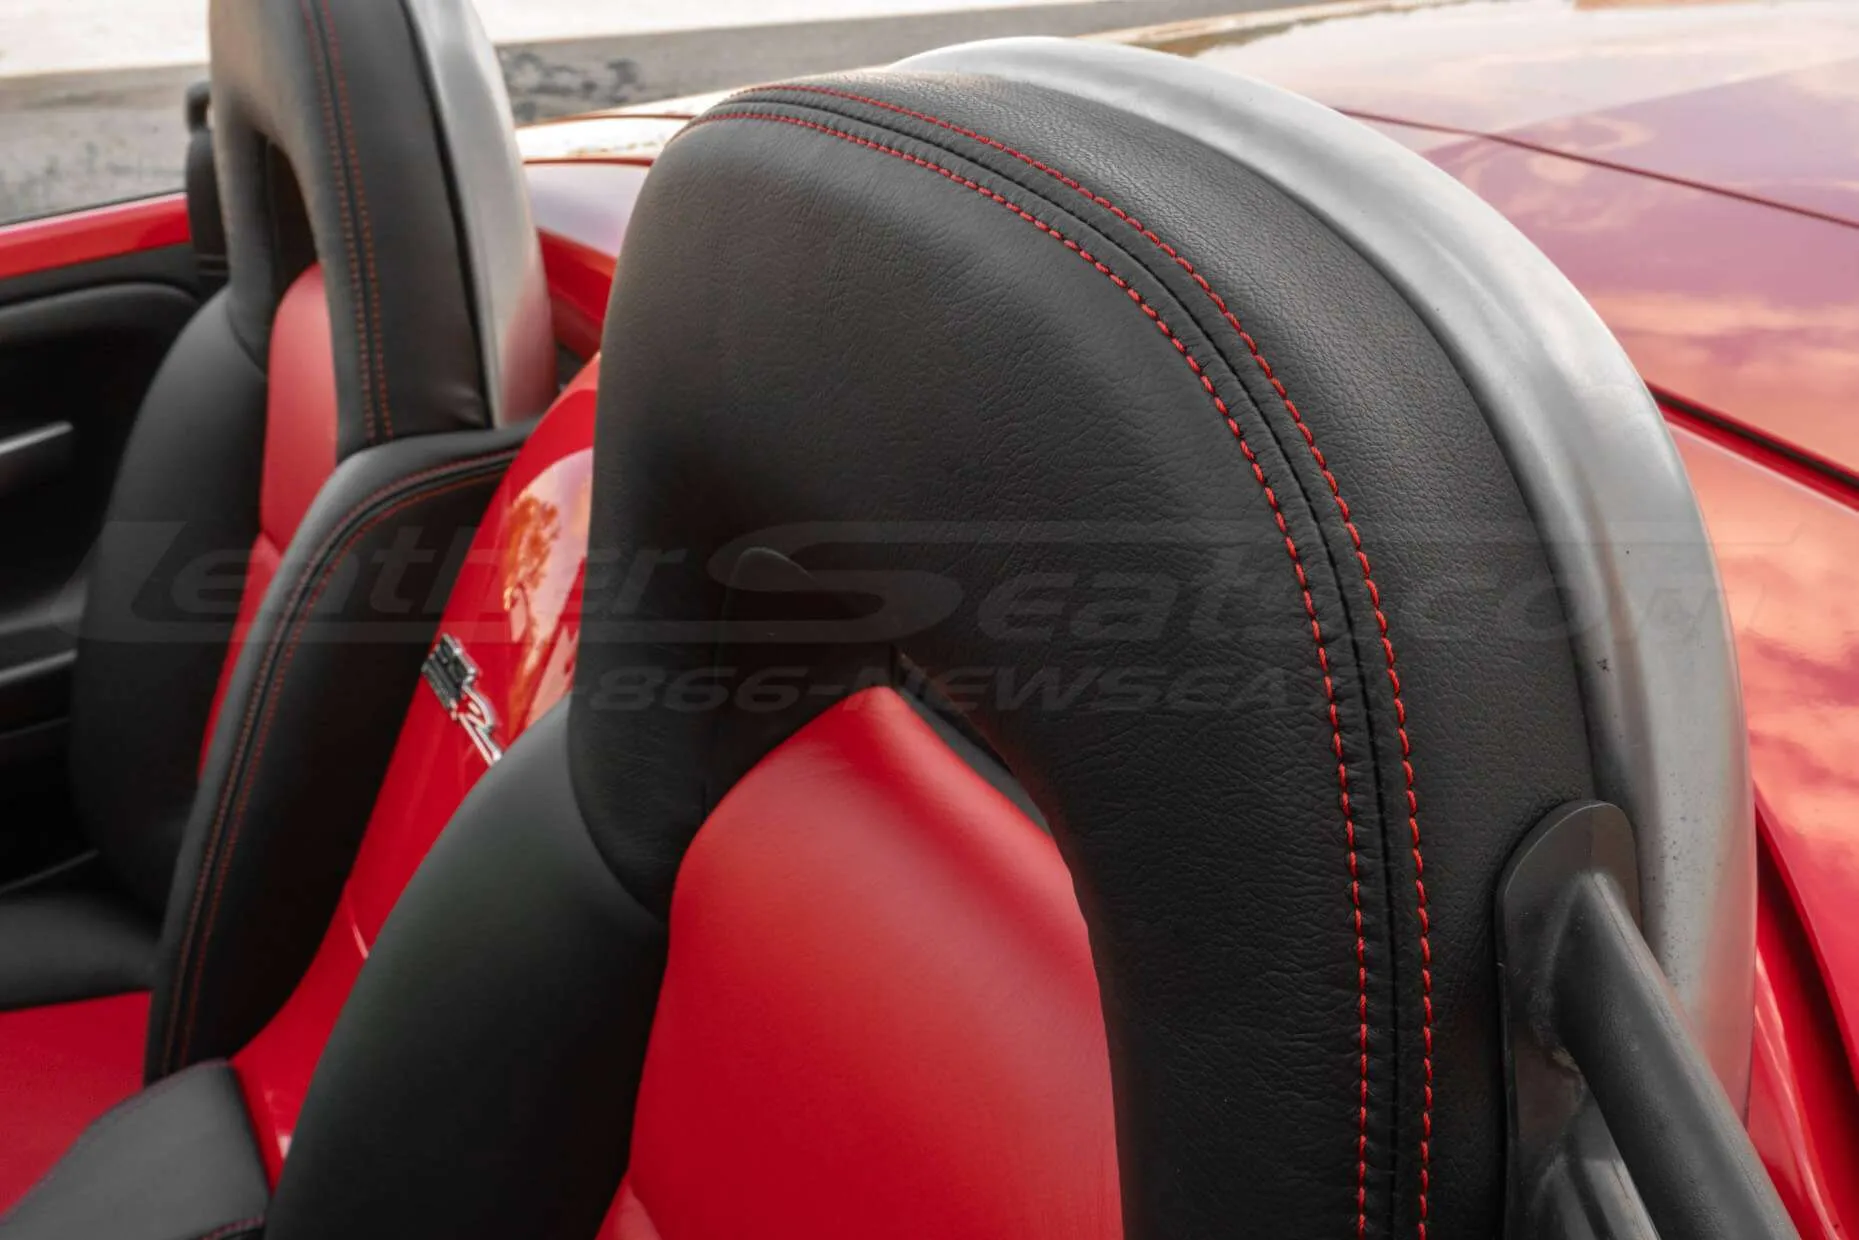 Chevrolet SSR Leather Headrest close-up with contrasting Bright red stitching